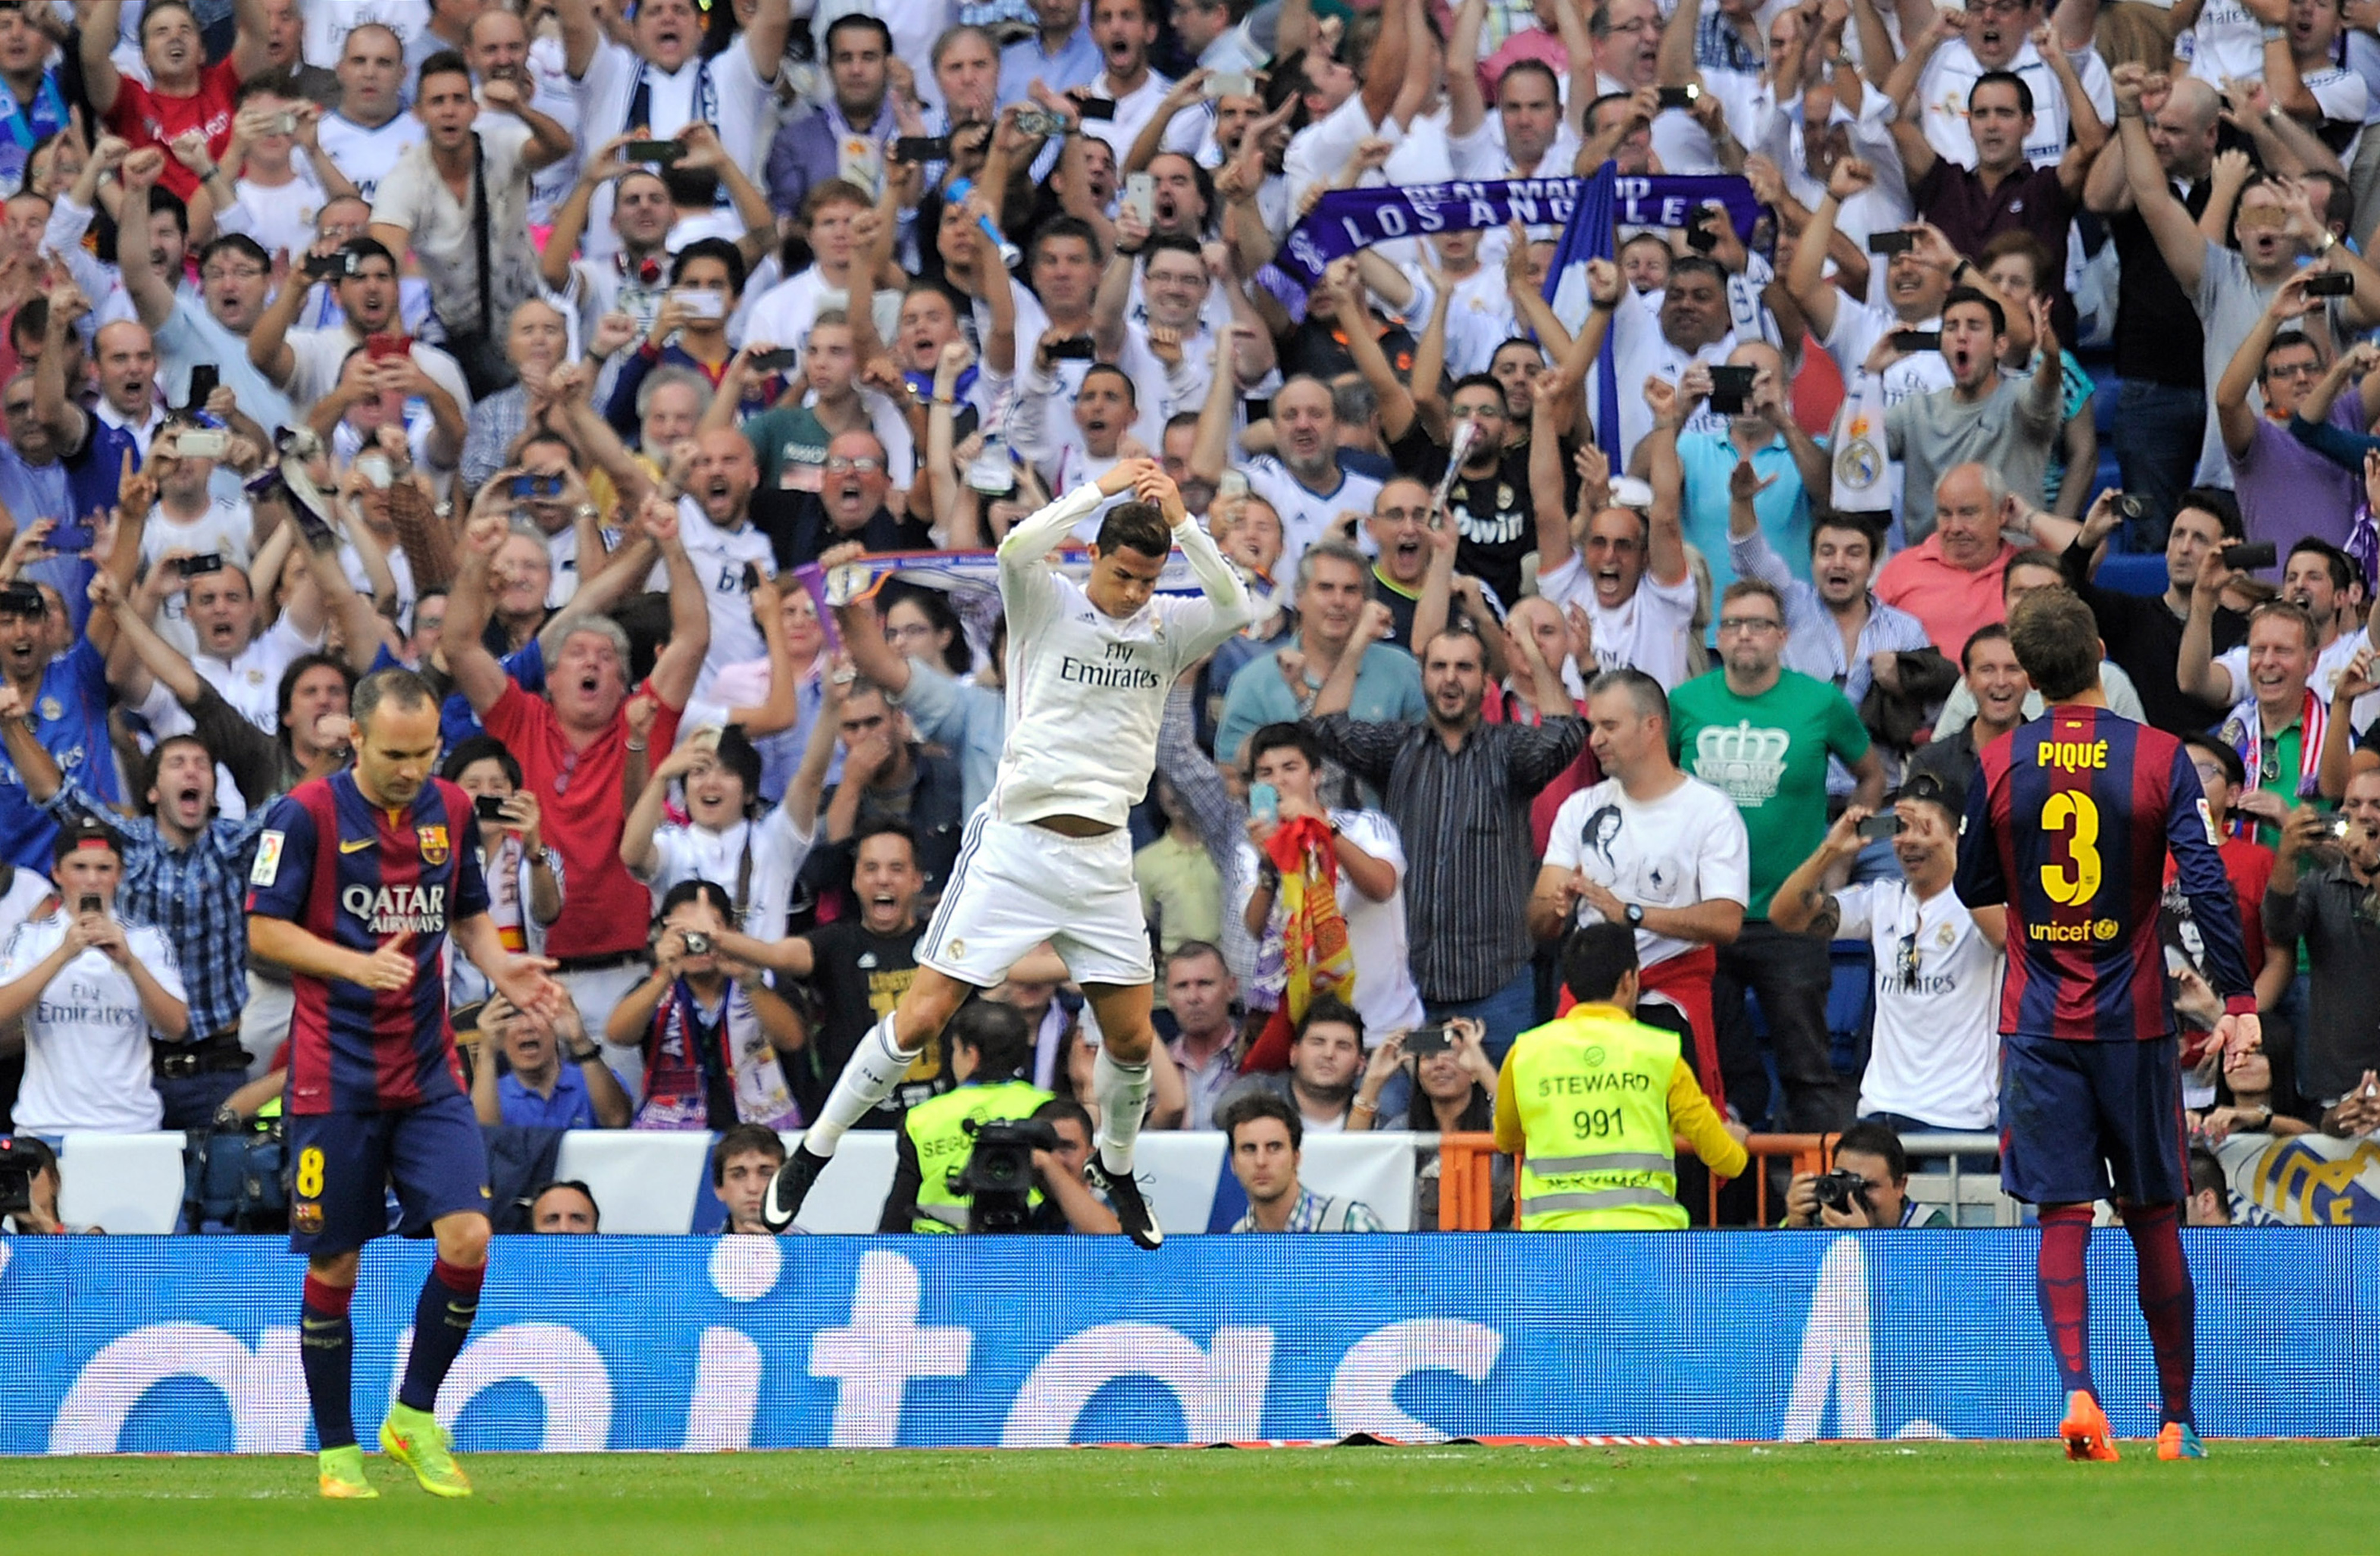 MADRID, SPAIN - OCTOBER 25: Cristiano Ronaldo of Real Madrid CF celebrates after scoring his team's opening goal from the penalty spot during the La Liga match between Real Madrid CF and FC Barcelona at Estadio Santiago Bernabeu on October 25, 2014 in Madrid, Spain. (Photo by Denis Doyle/Getty Images)